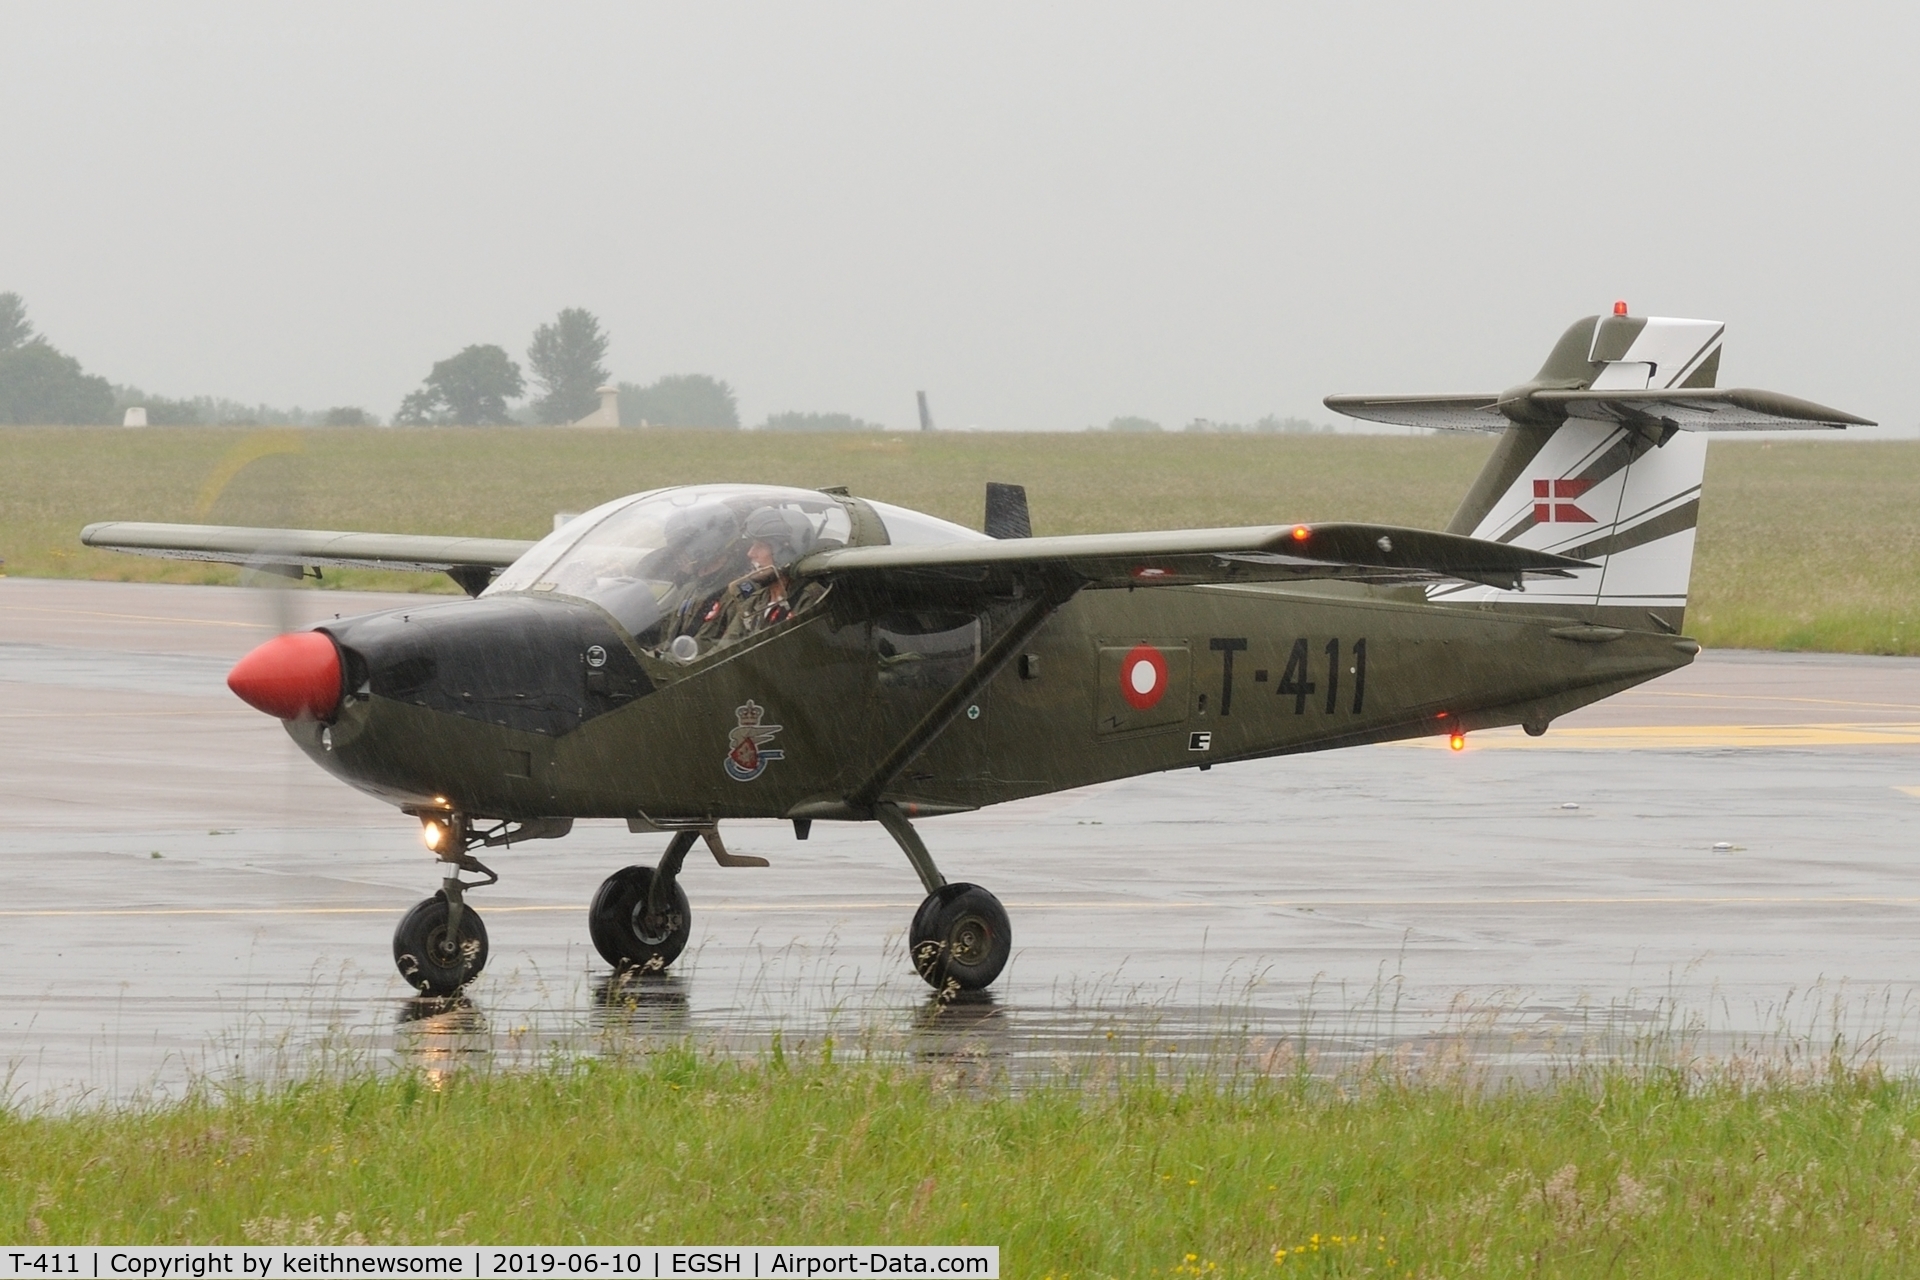 T-411, Saab T-17 Supporter C/N 15-211, Arriving at very wet Norwich.